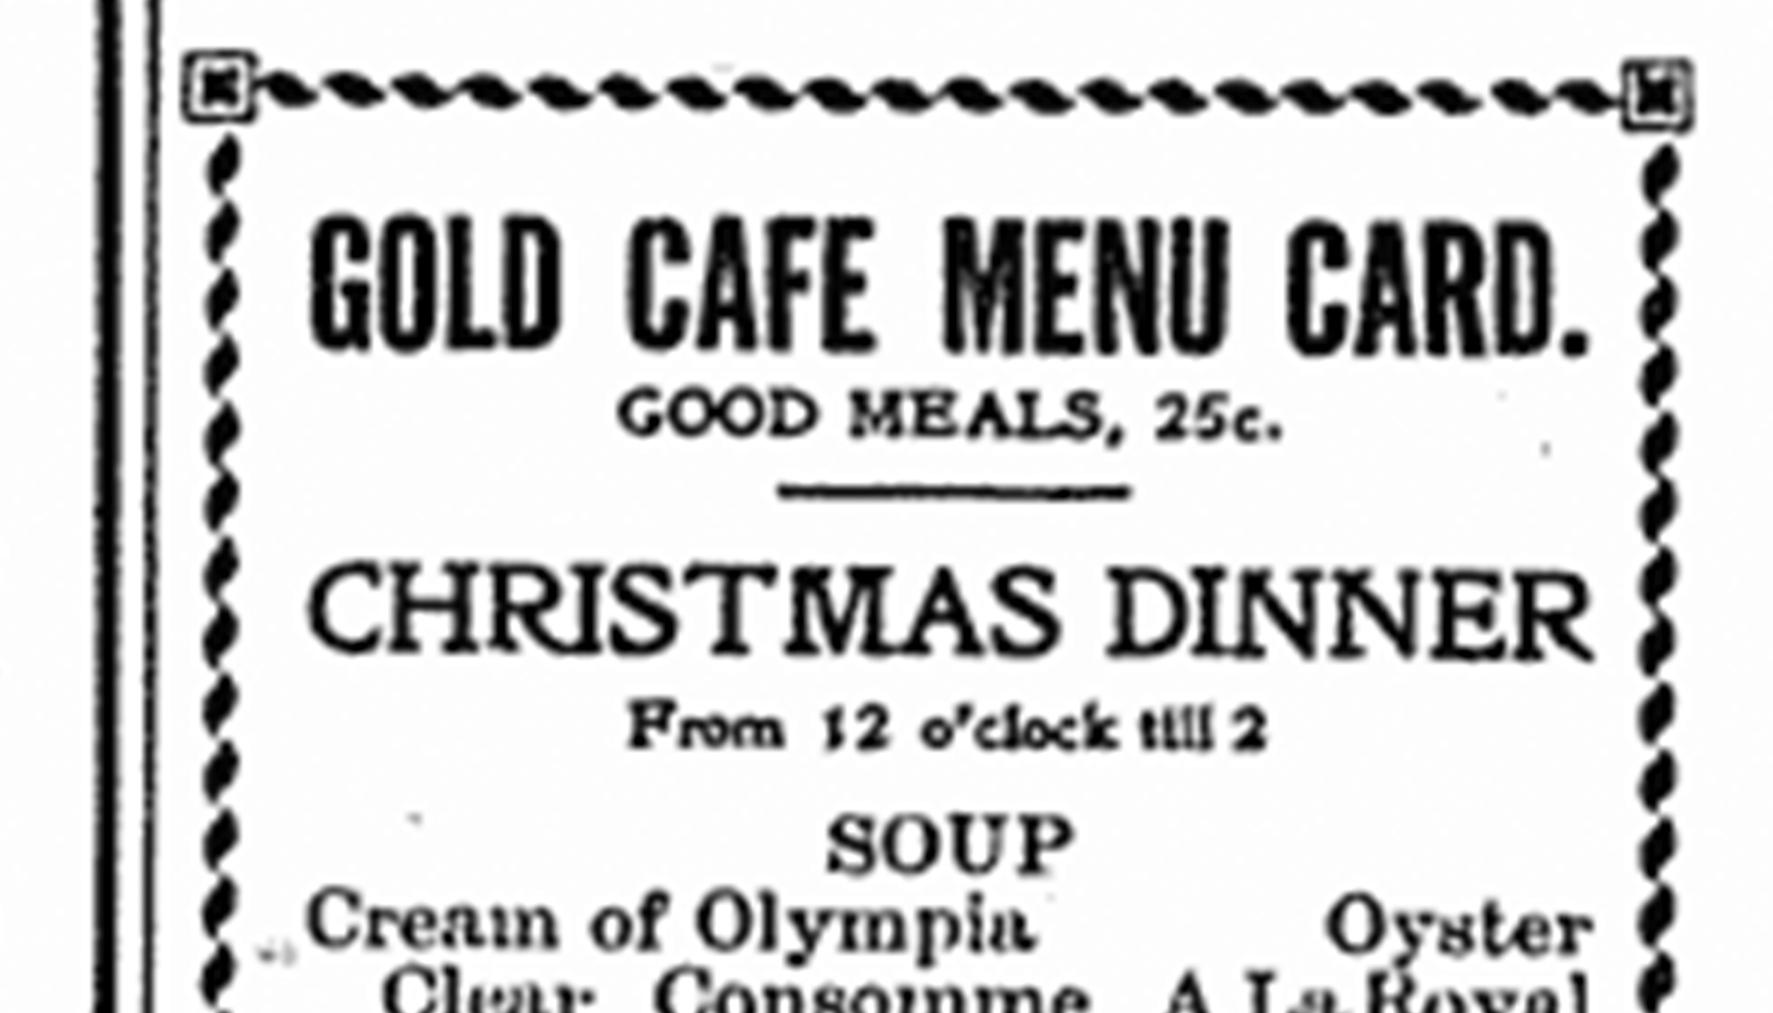 Advertisement for Gold Cage in Red Deer News, Dec. 21, 1910